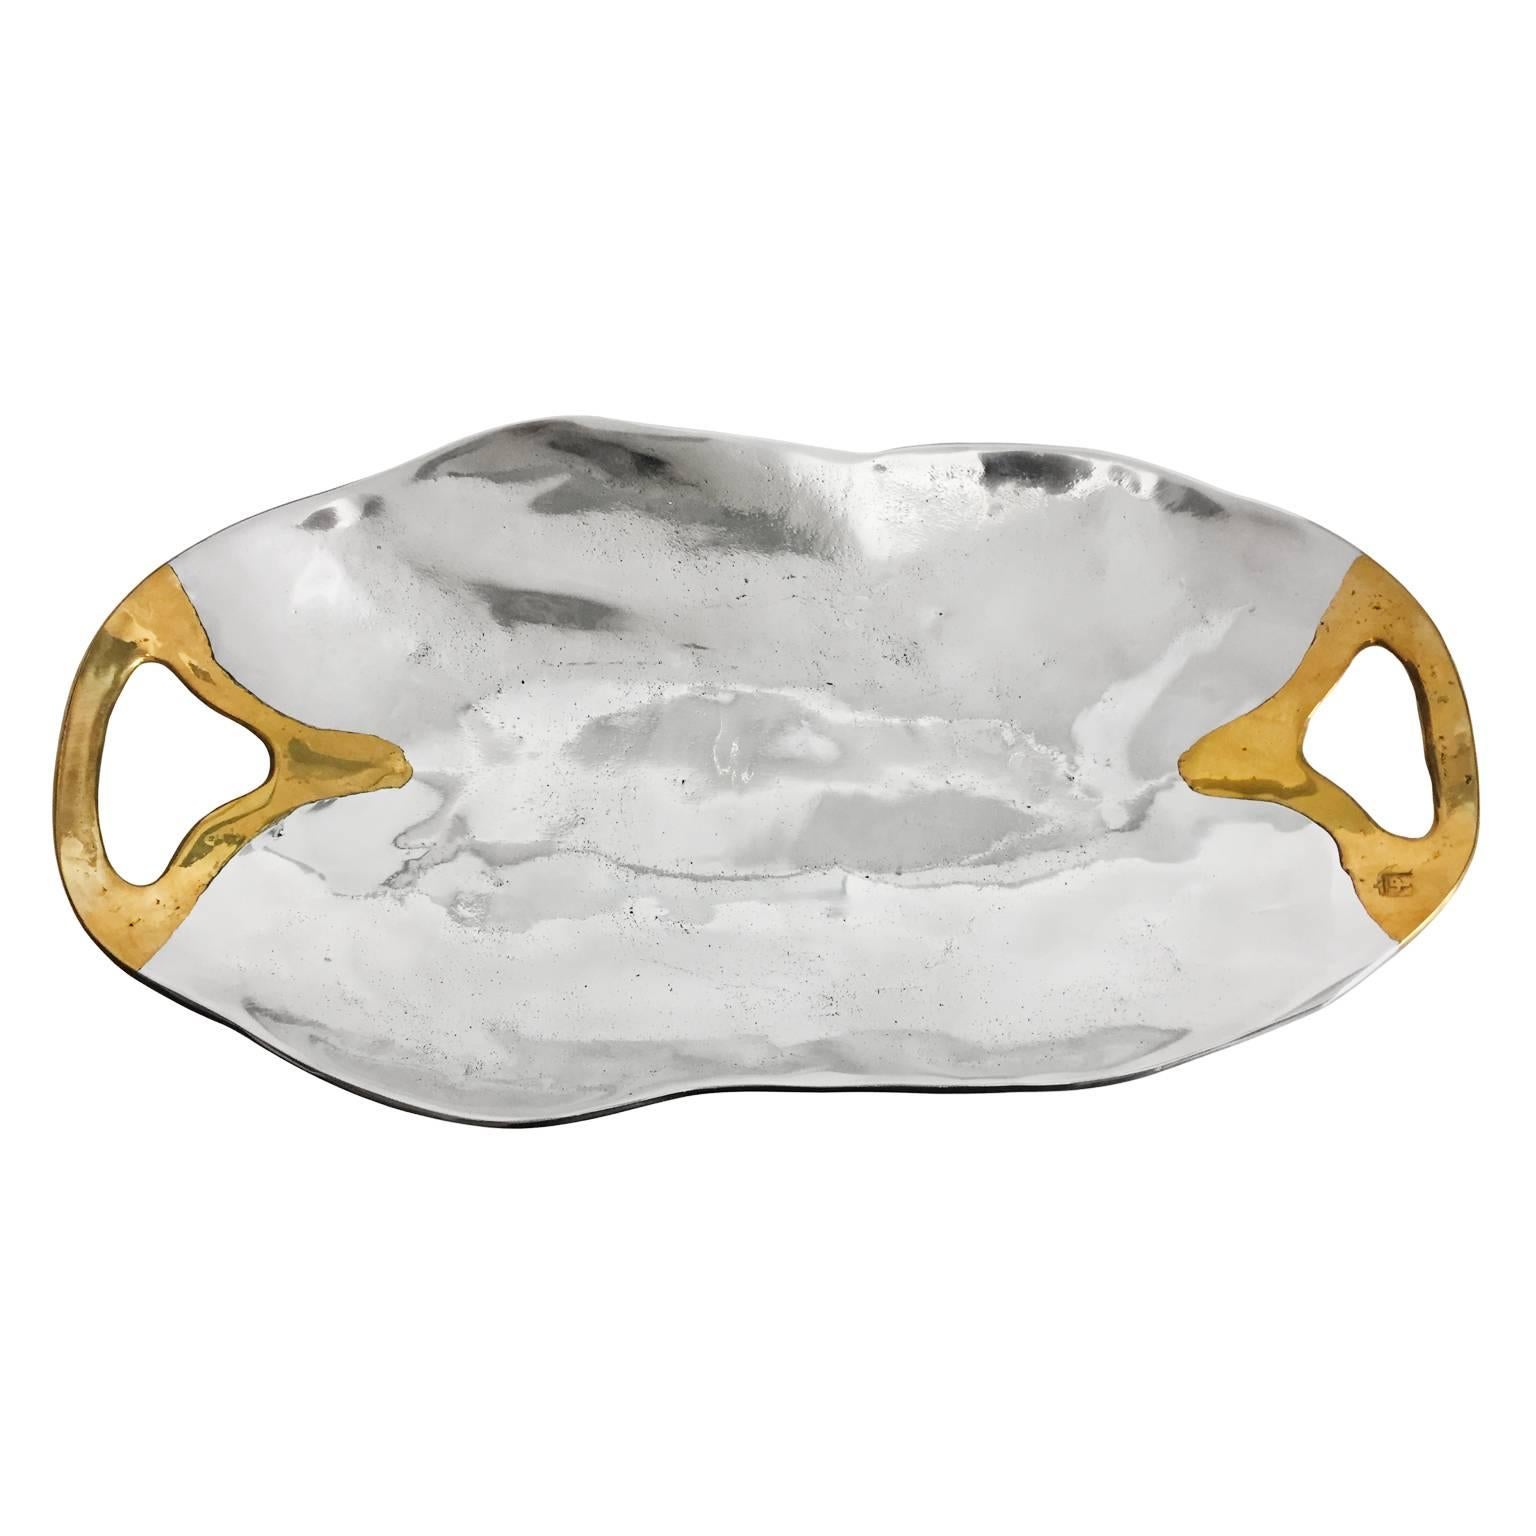 Aluminum and brass free-form centerpiece bowl by David Marshall, Spain, 1970s.